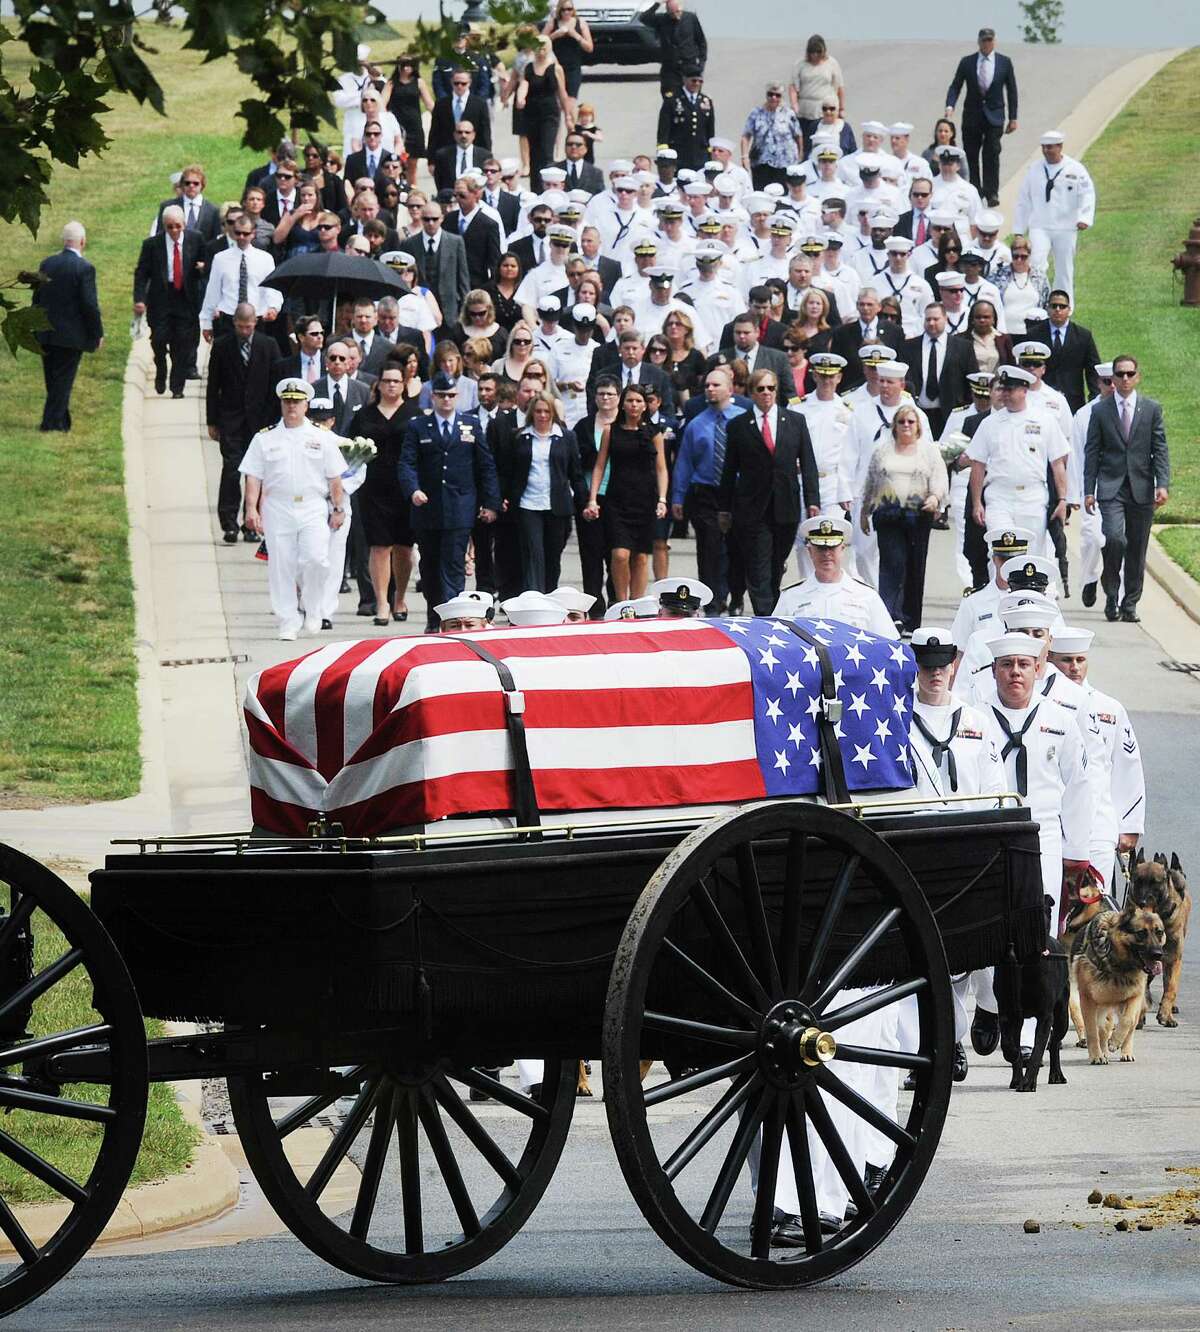 The burial service of U.S. Navy Petty Officer 2nd Class Sean E. Brazas of Greensboro, North Carolina, June 19, 2012 at Arlington National Cemetery in Arlington, Virginia. Brazas was killed last month in Afghanistan by an enemy sniper while he was helping his unit board a helicopter.